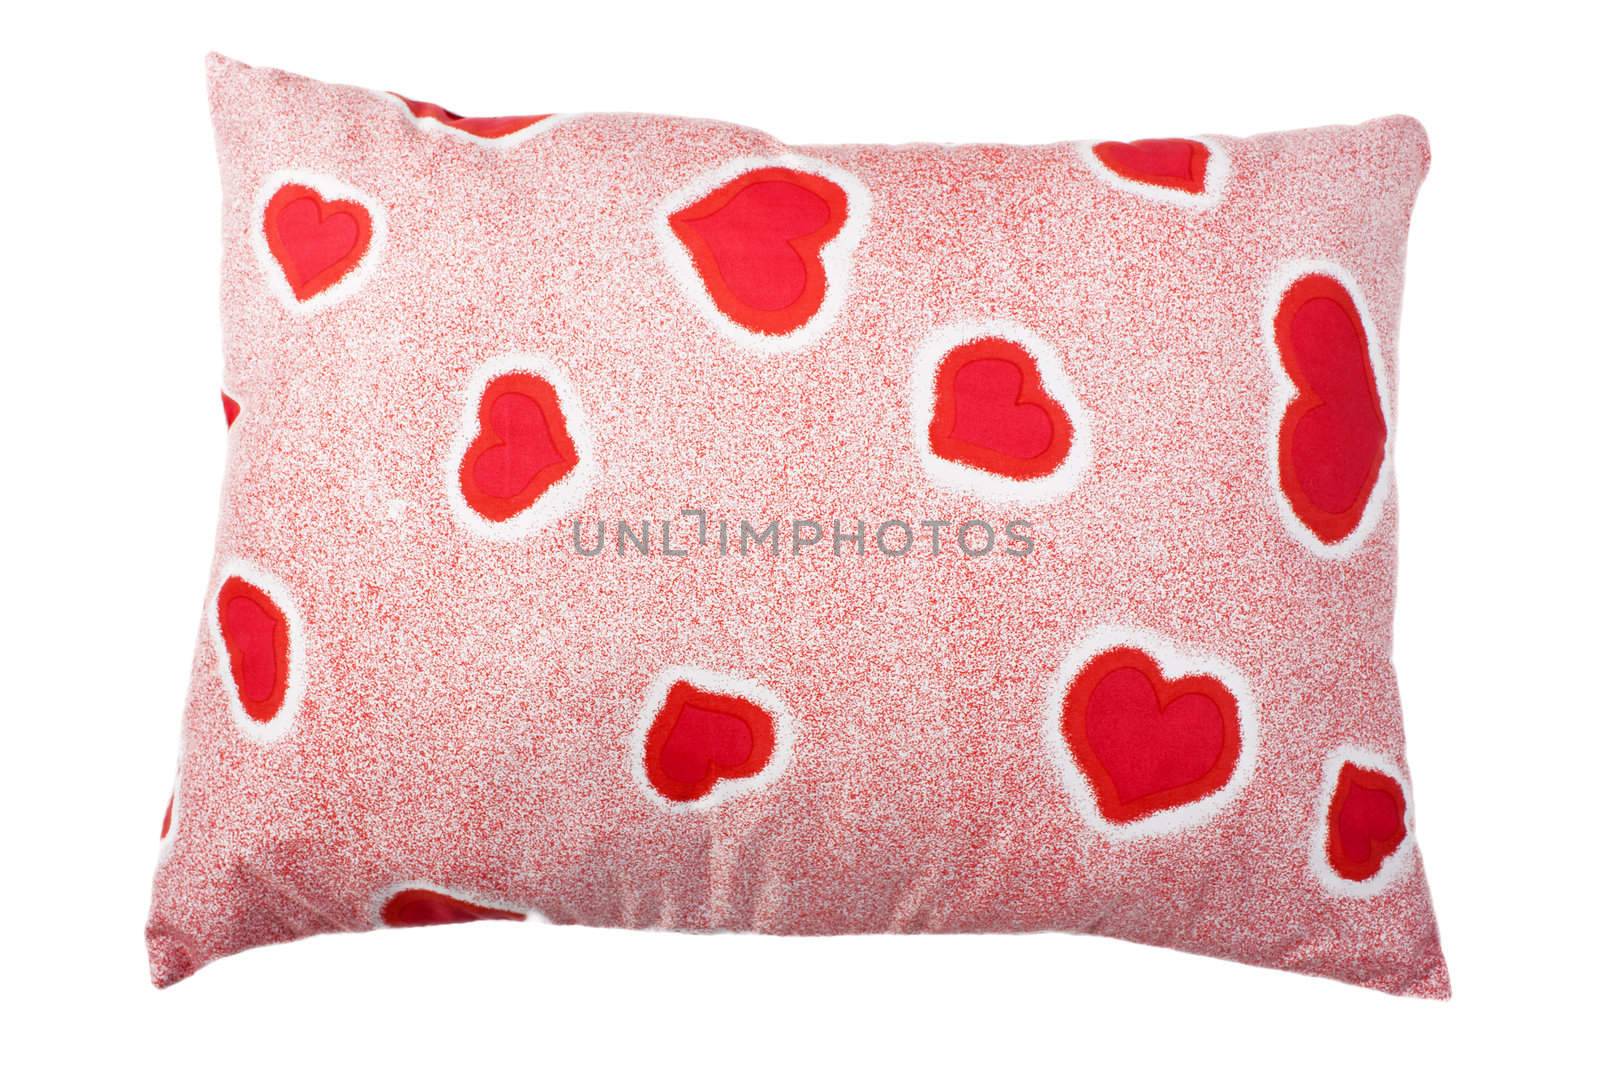 Heart pillow by ia_64